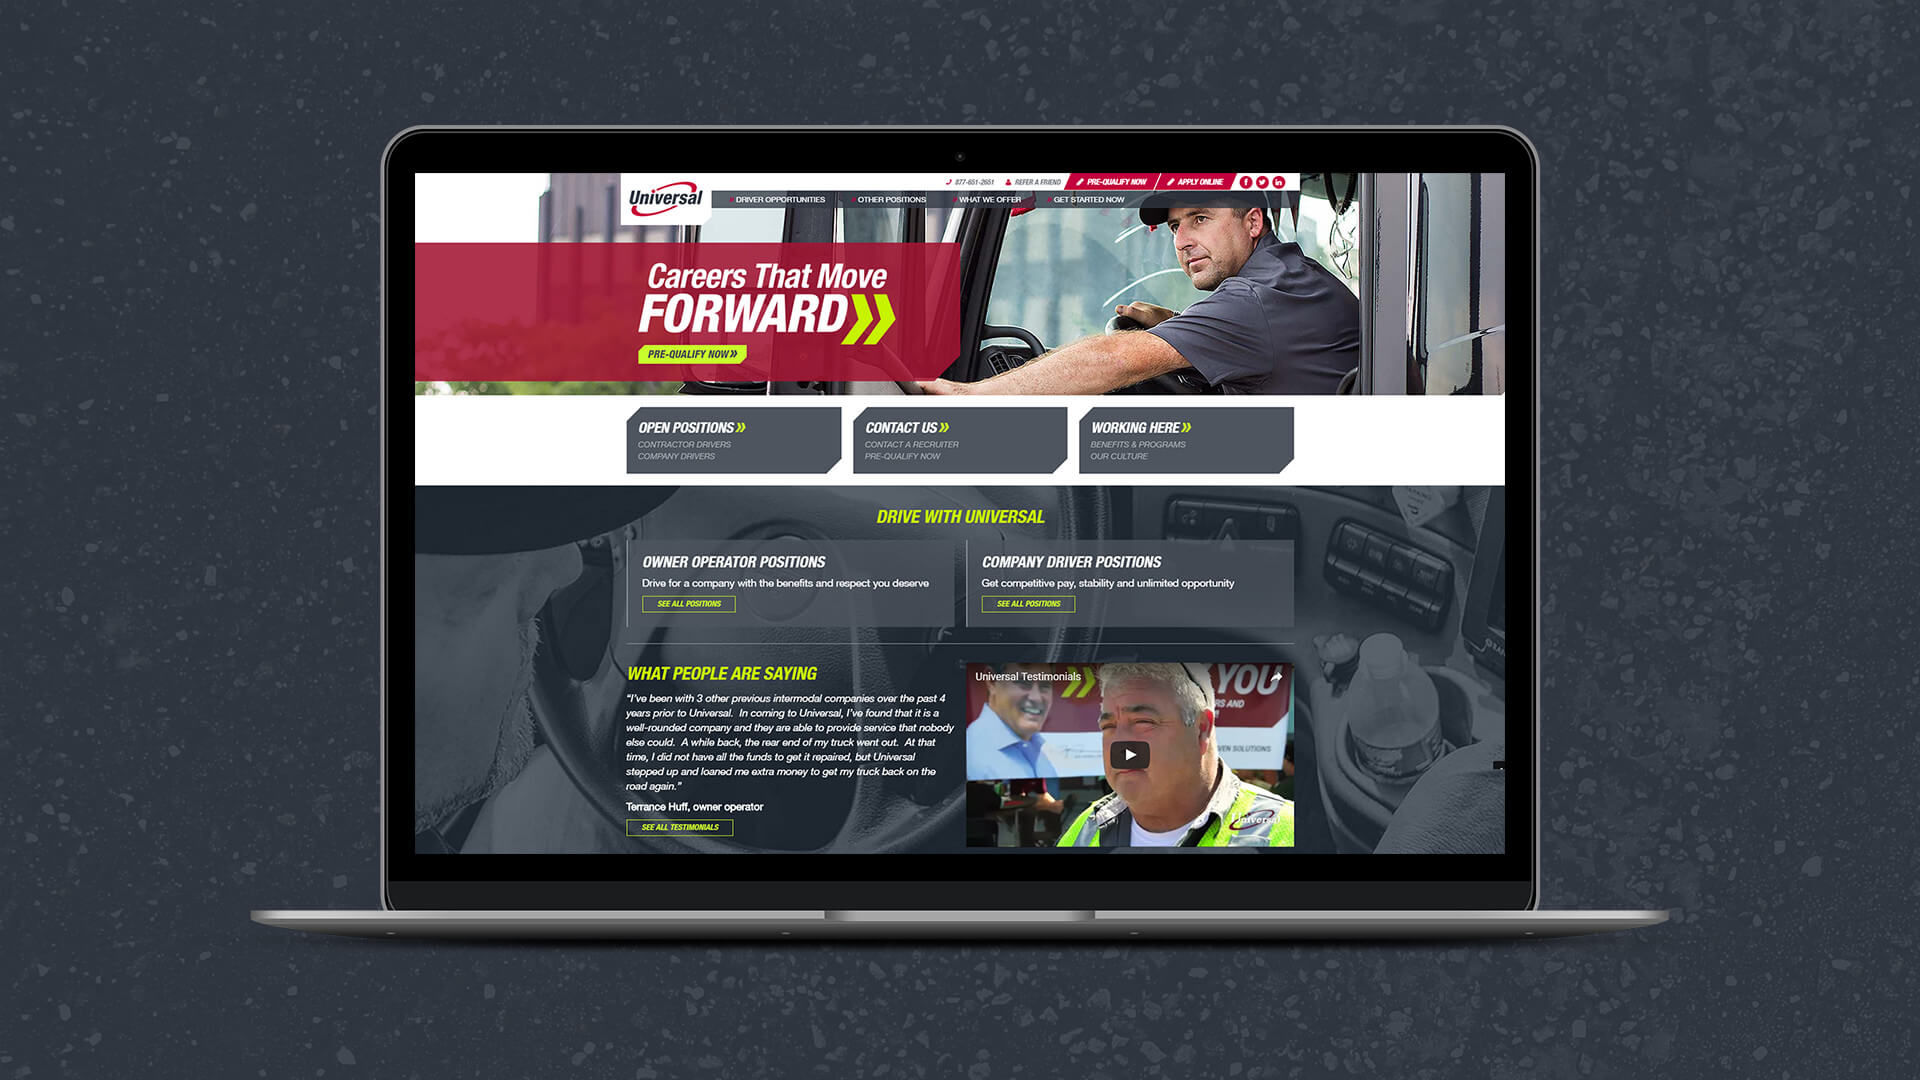 We launched a new, driver recruiting website and developed targeted advertising campaigns including print, digital and video media that told the story of what Universal meant to their drivers